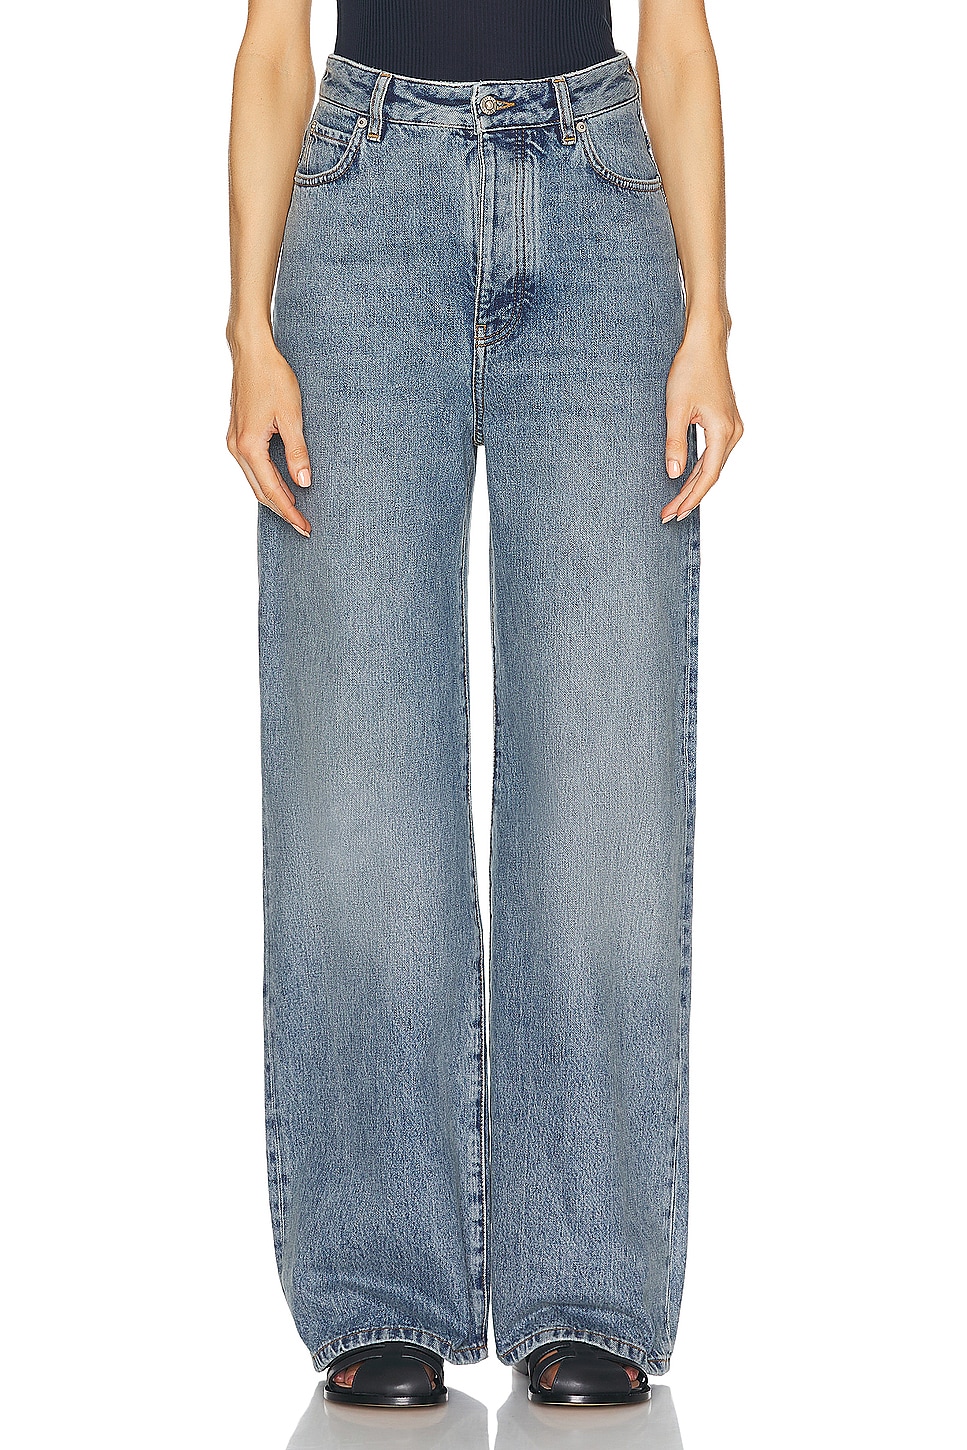 Image 1 of Loewe High Waisted Straight Leg in Washed Blue